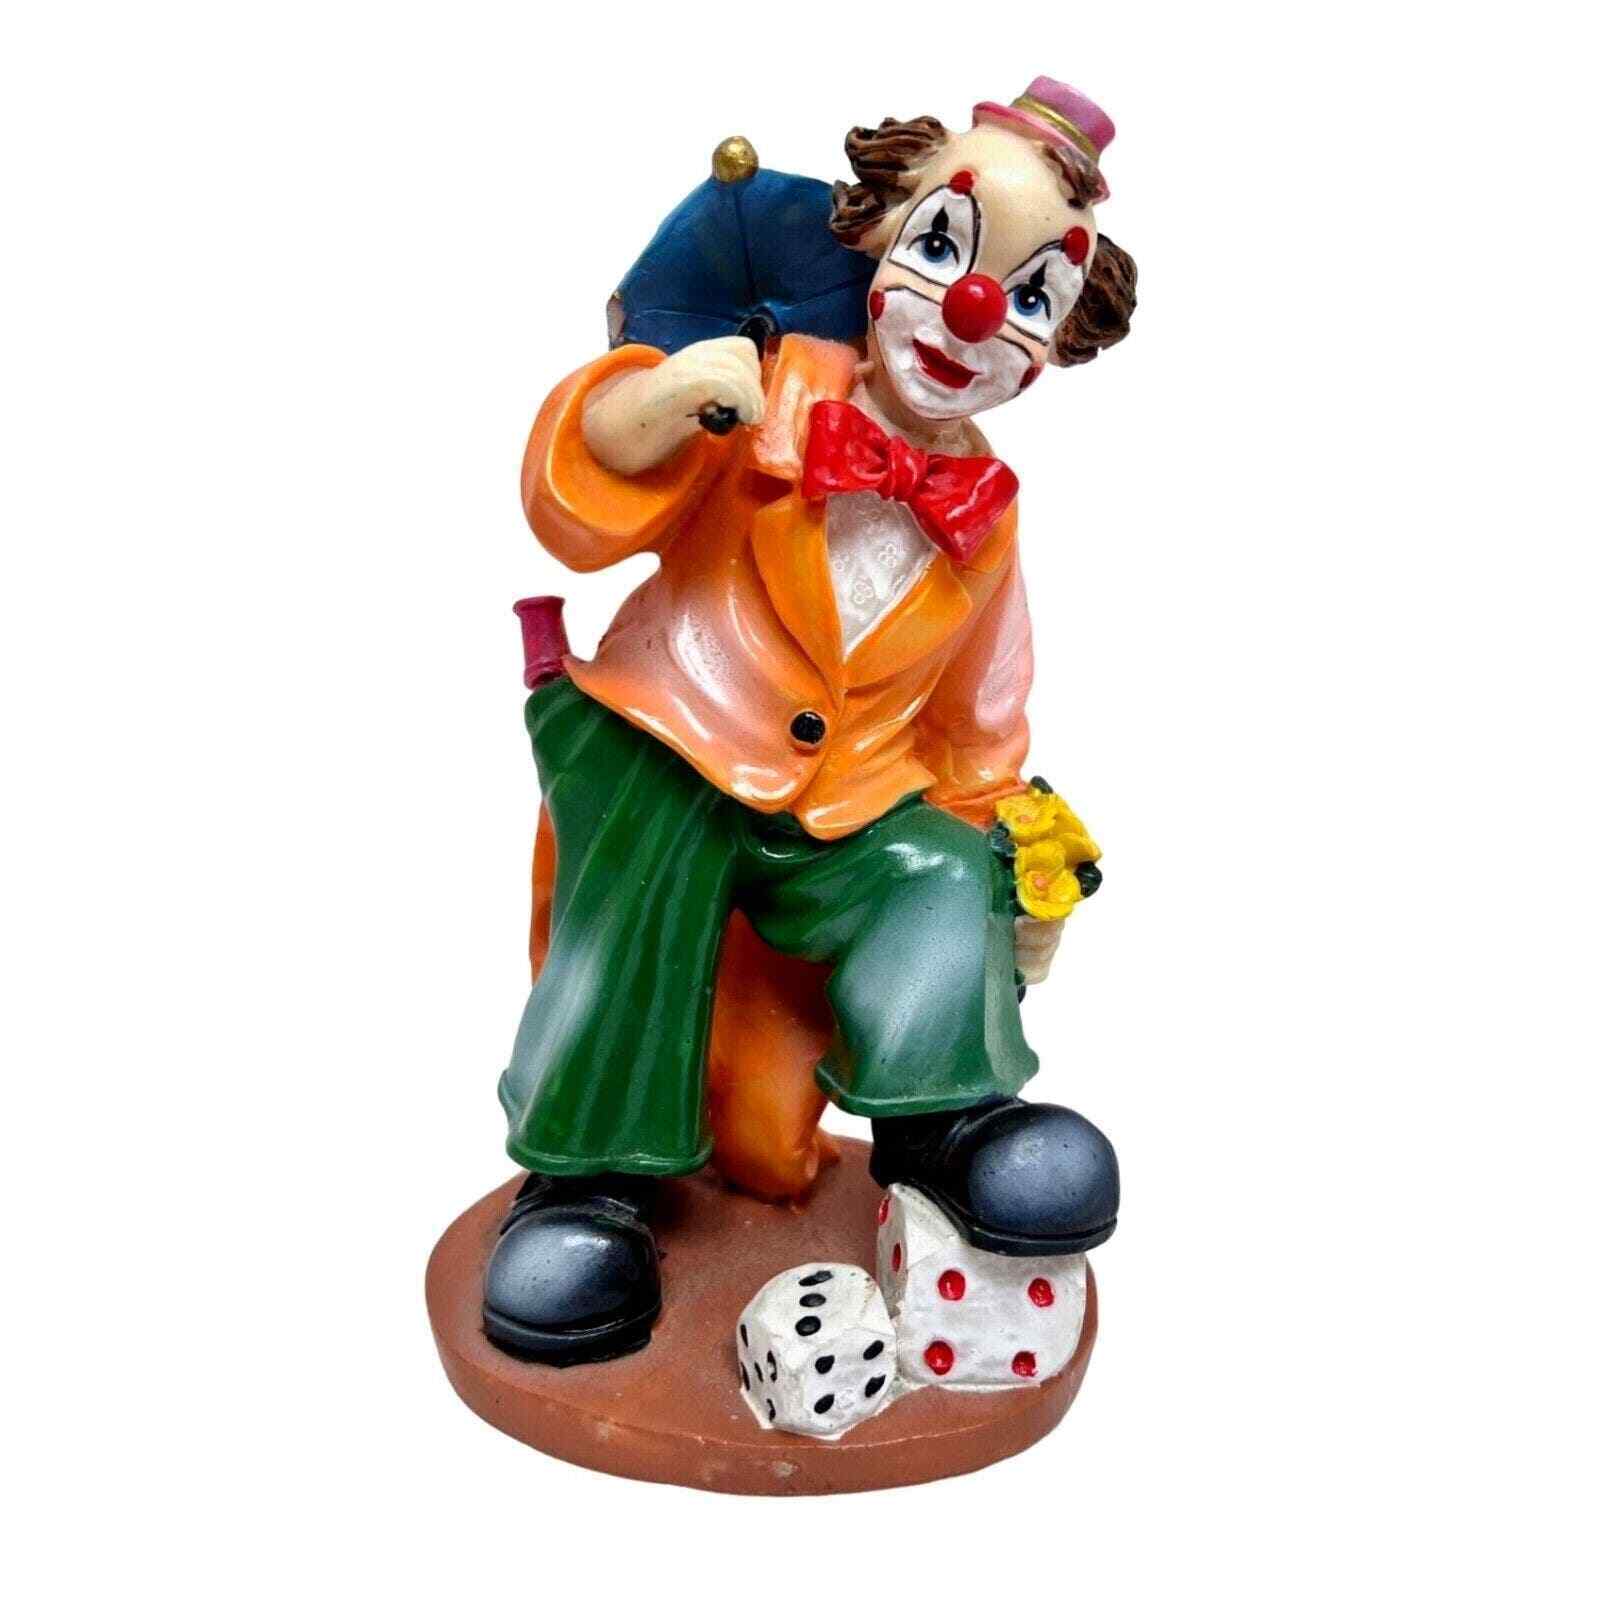 VTG Resin Colorful Performing Clown Table Figurine Holding Umbrella foot on Dice